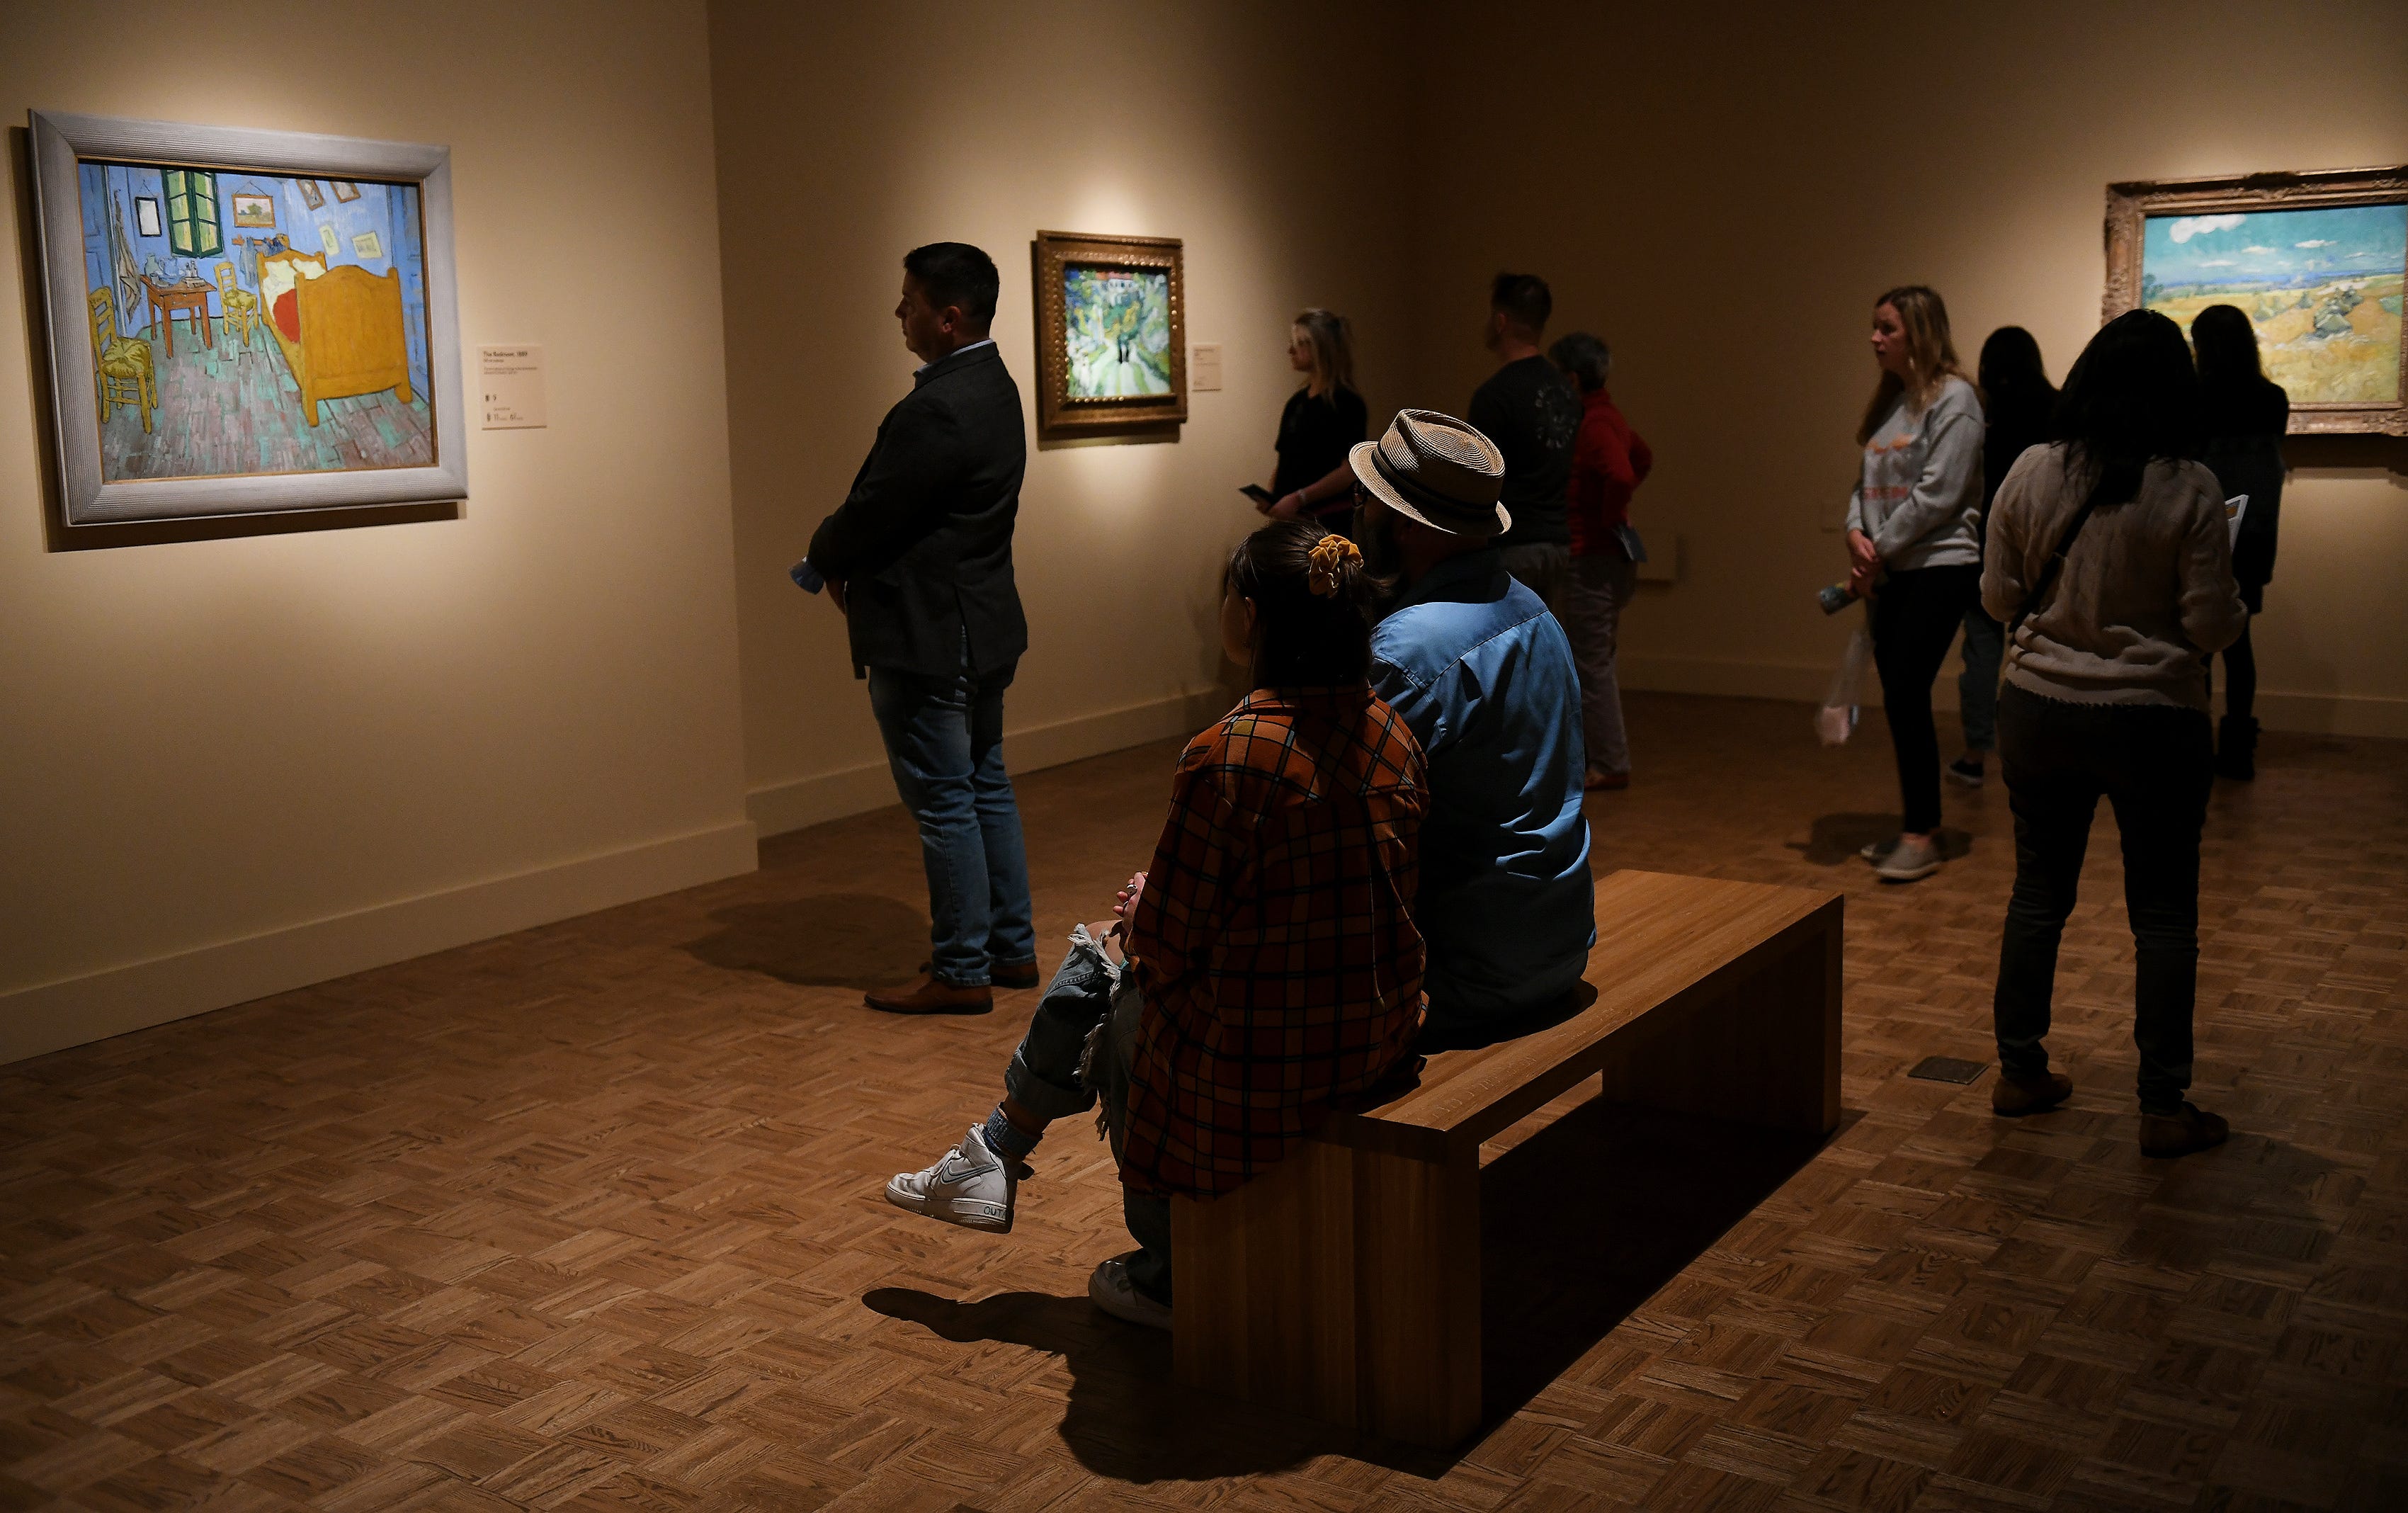 People look at “The Bedroom” at left and other paintings at the Van Gogh exhibit at the Detroit Institute of Arts in Detroit on Oct. 2, 2022.